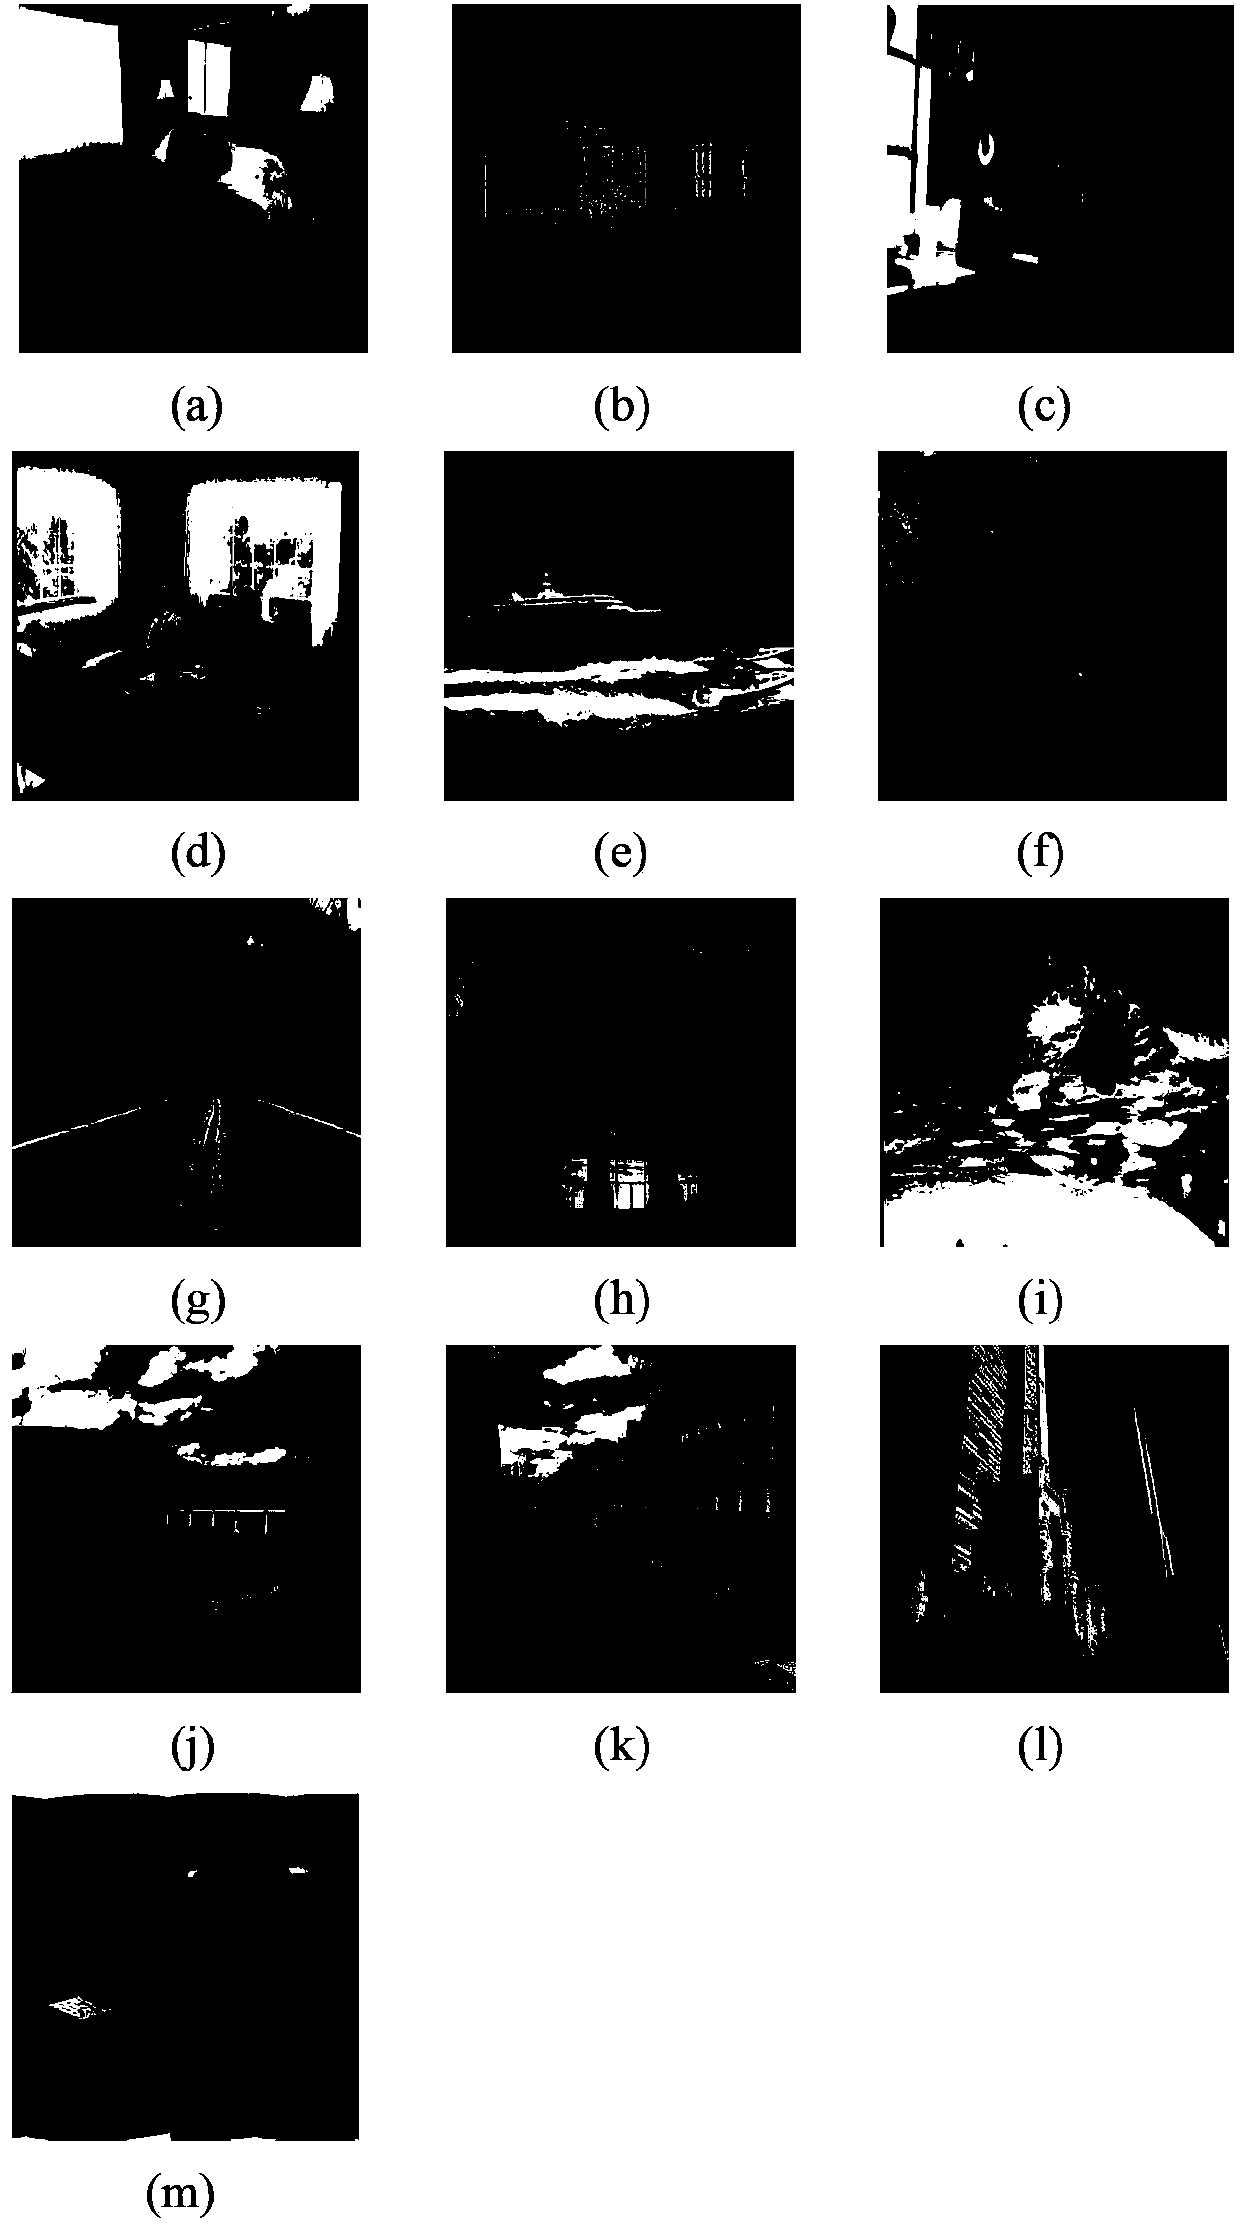 Multi-scale dictionary natural scene image classification method based on latent Dirichlet model